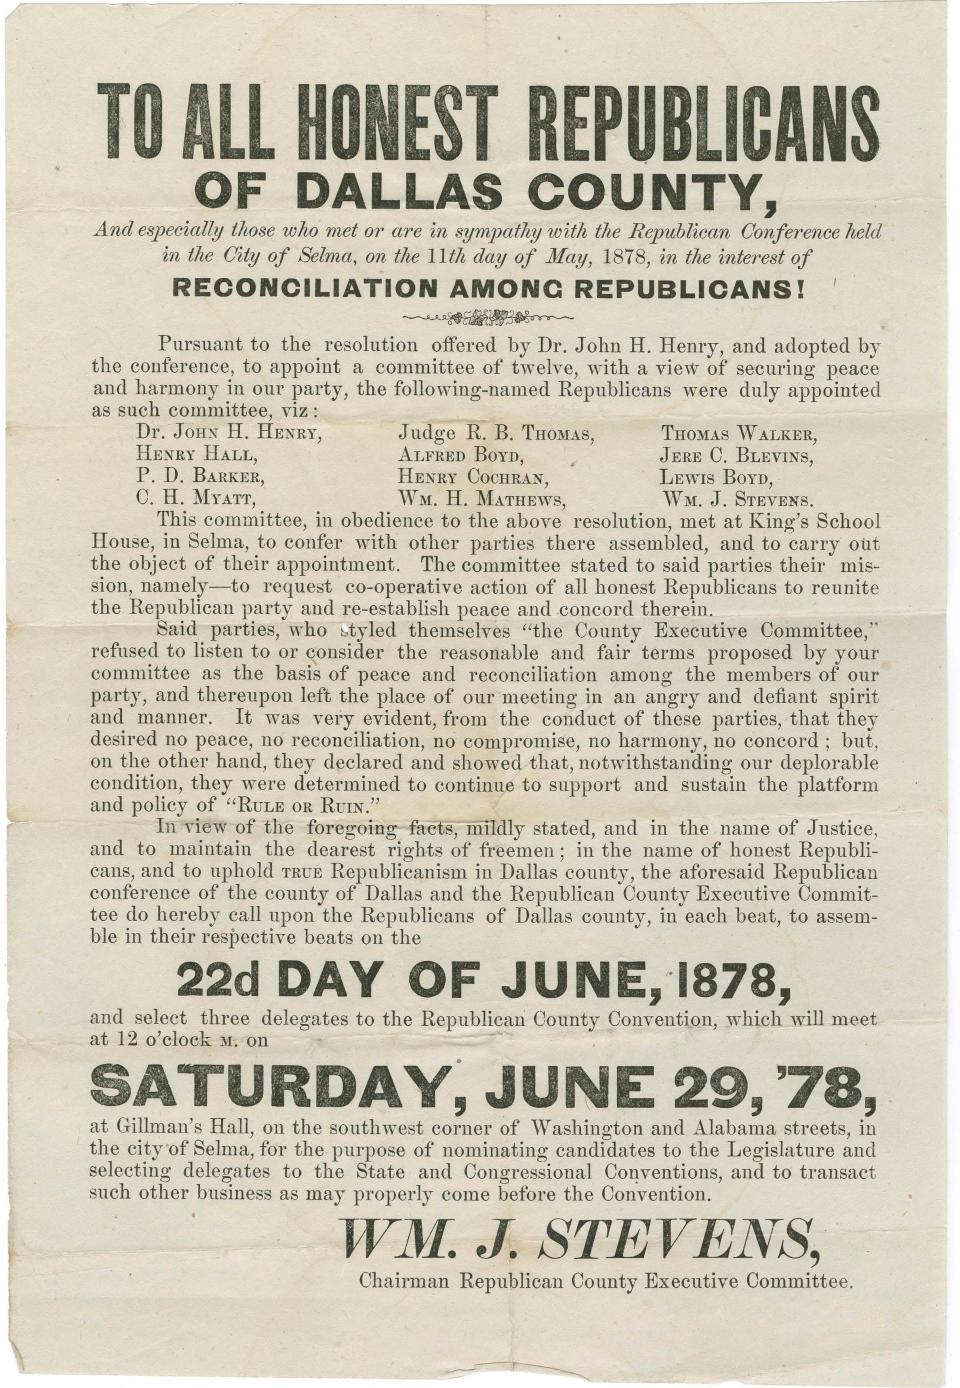 An announcement from the Republican Party of Dallas County in May 1878 announcing peace and harmony within the party.